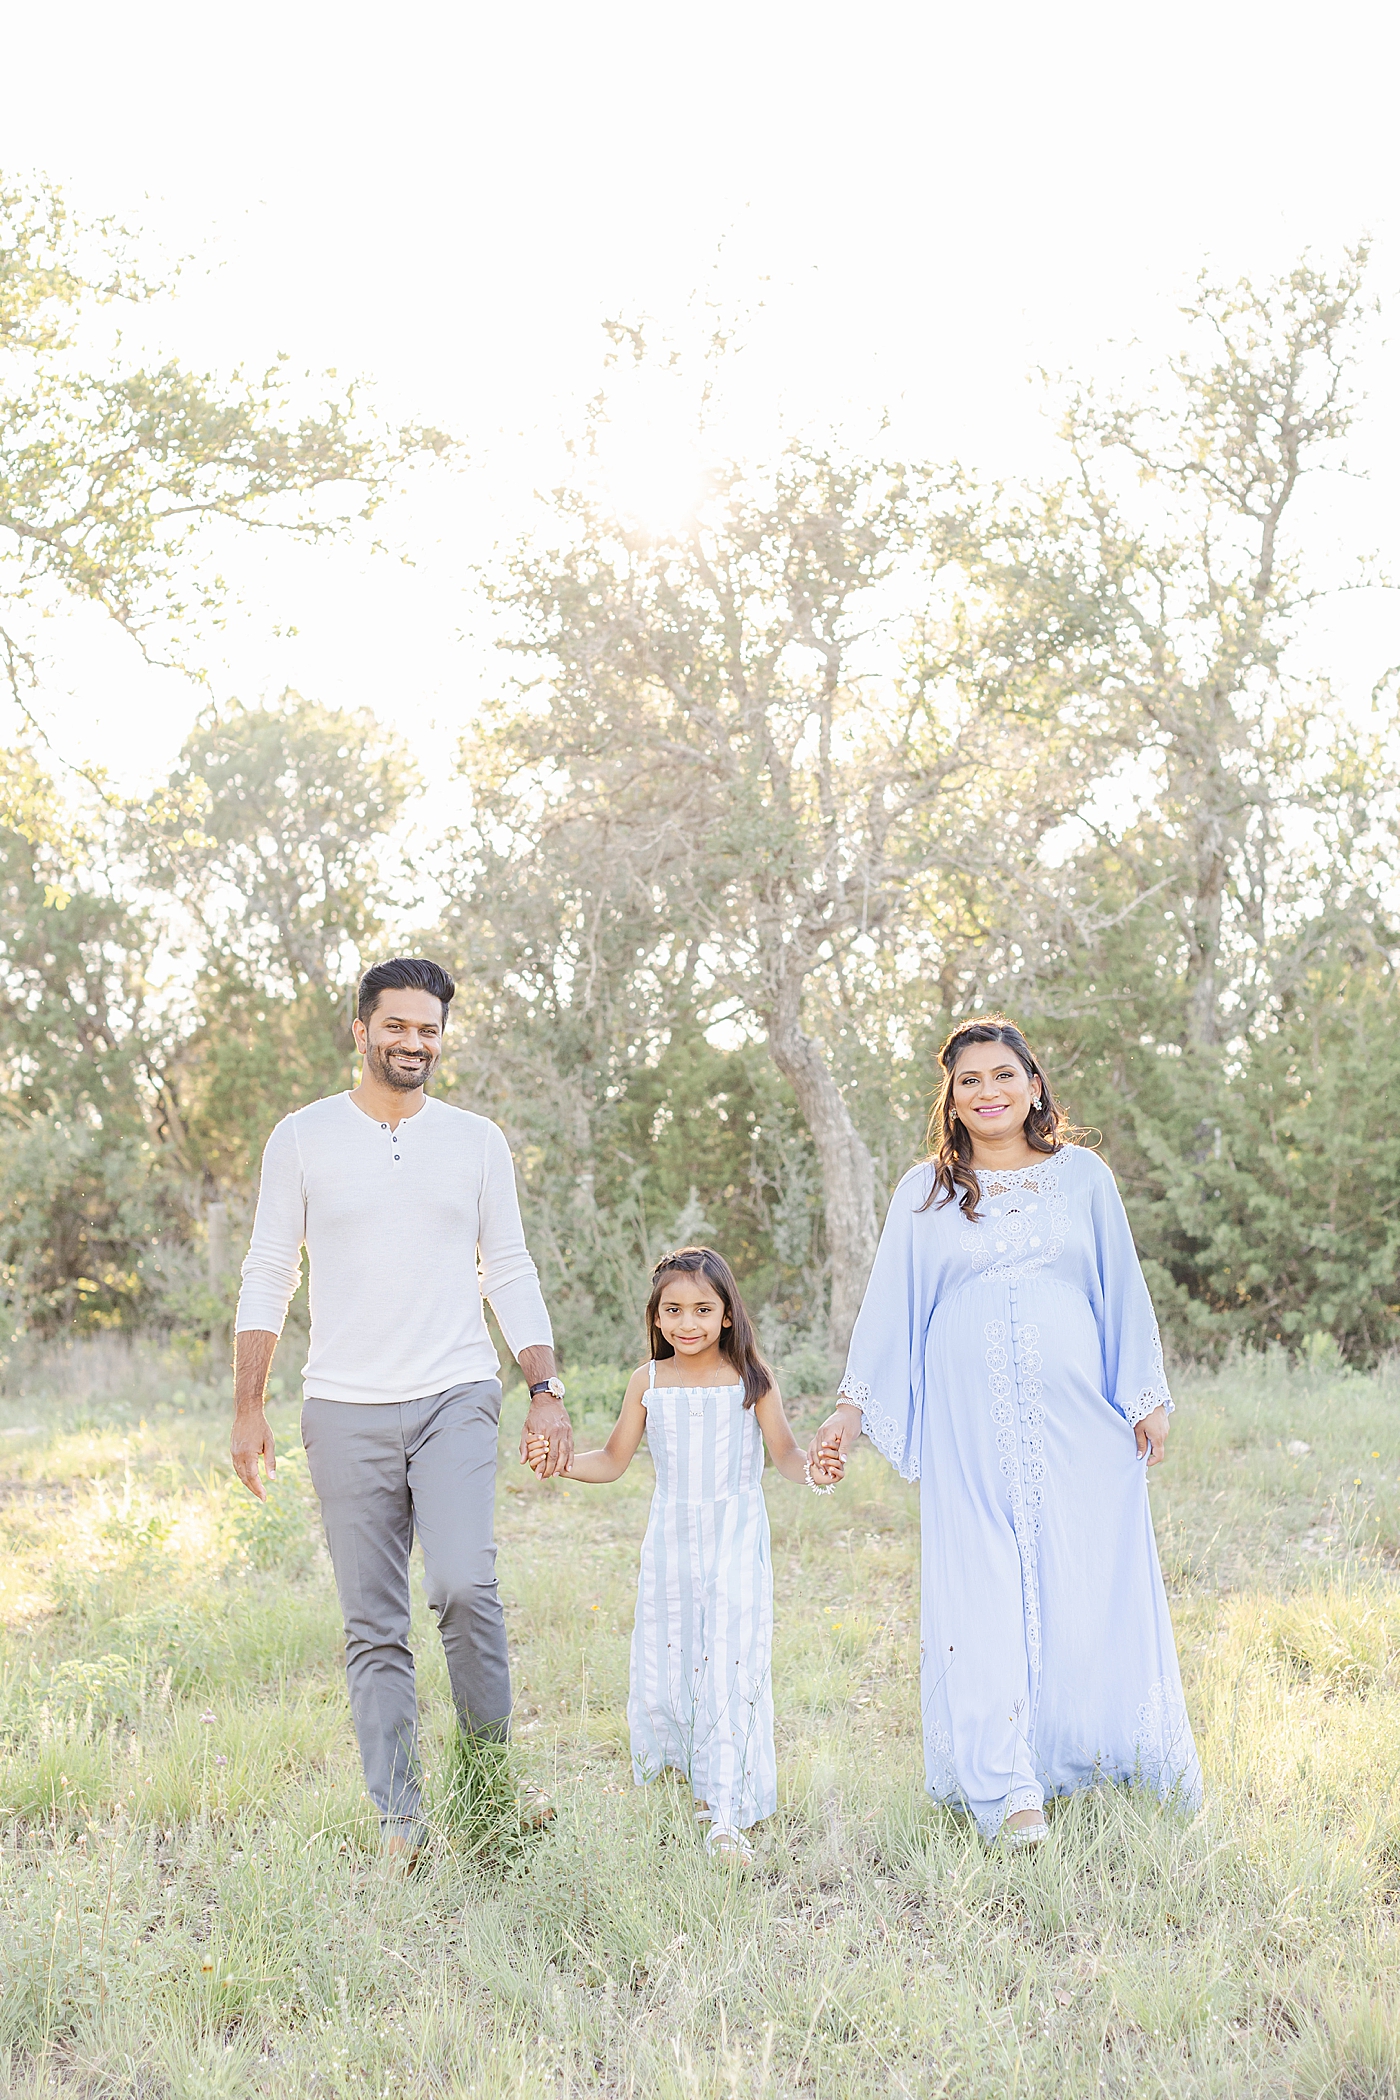 Family of three walking together during their Outdoor Maternity Session in Austin | Photo by Sana Ahmed Photography